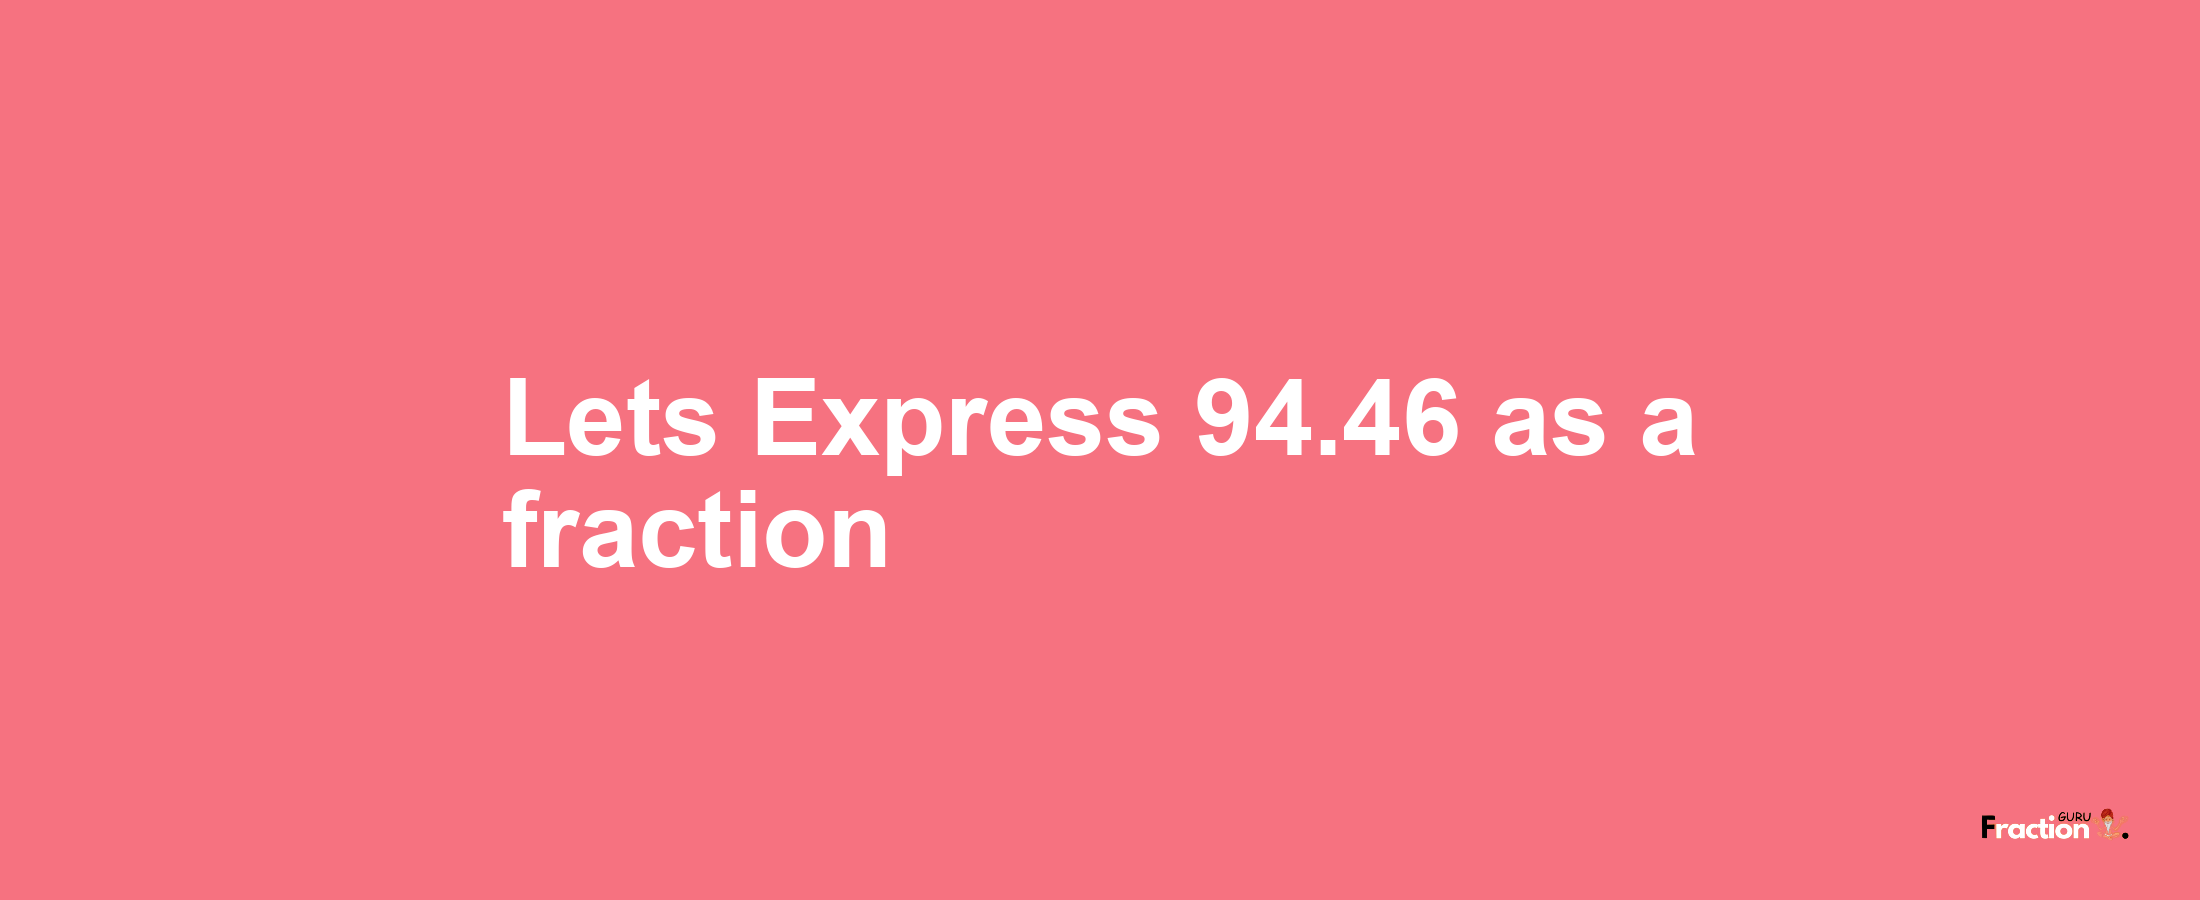 Lets Express 94.46 as afraction